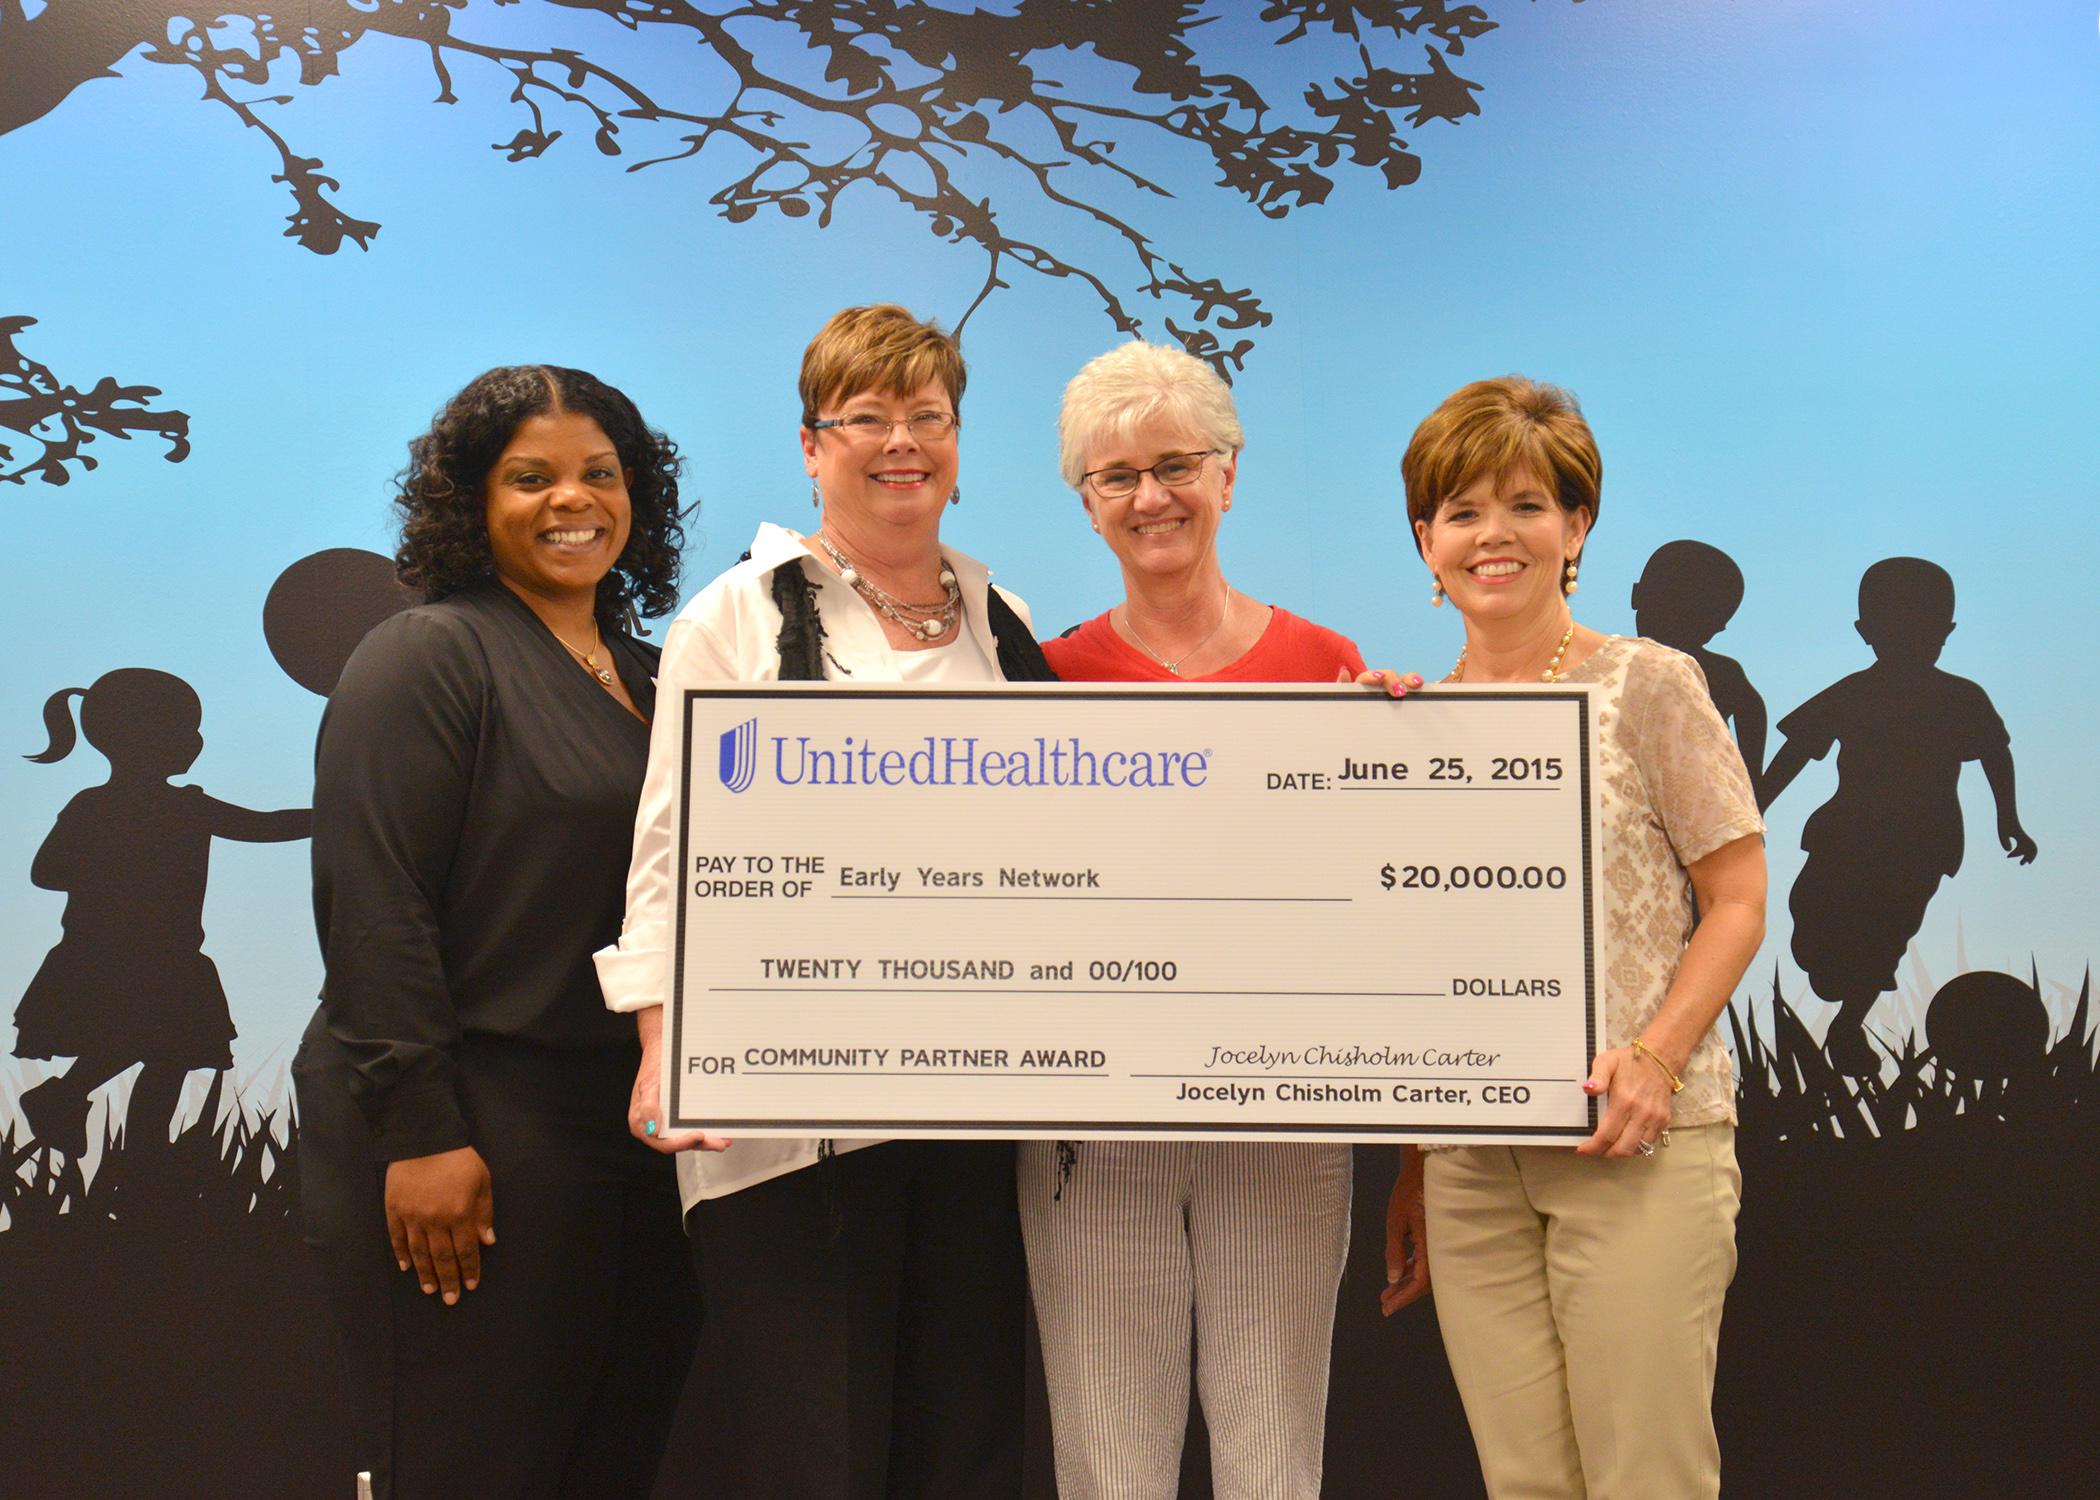 Representatives of the Early Years Network and UnitedHealthcare take part in a check presentation ceremony during the grand opening of the Hinds County Resource and Referral Center at 350 West Woodrow Wilson Avenue in Jackson, Mississippi on June 25, 2015. Celebrating their newly formed partnership are Kenisha Potter, left, pediatric health care coordinator for UnitedHealthcare; Louise E. Davis, professor with the Mississippi State University Extension Service and director of the Early Years Network; Connie